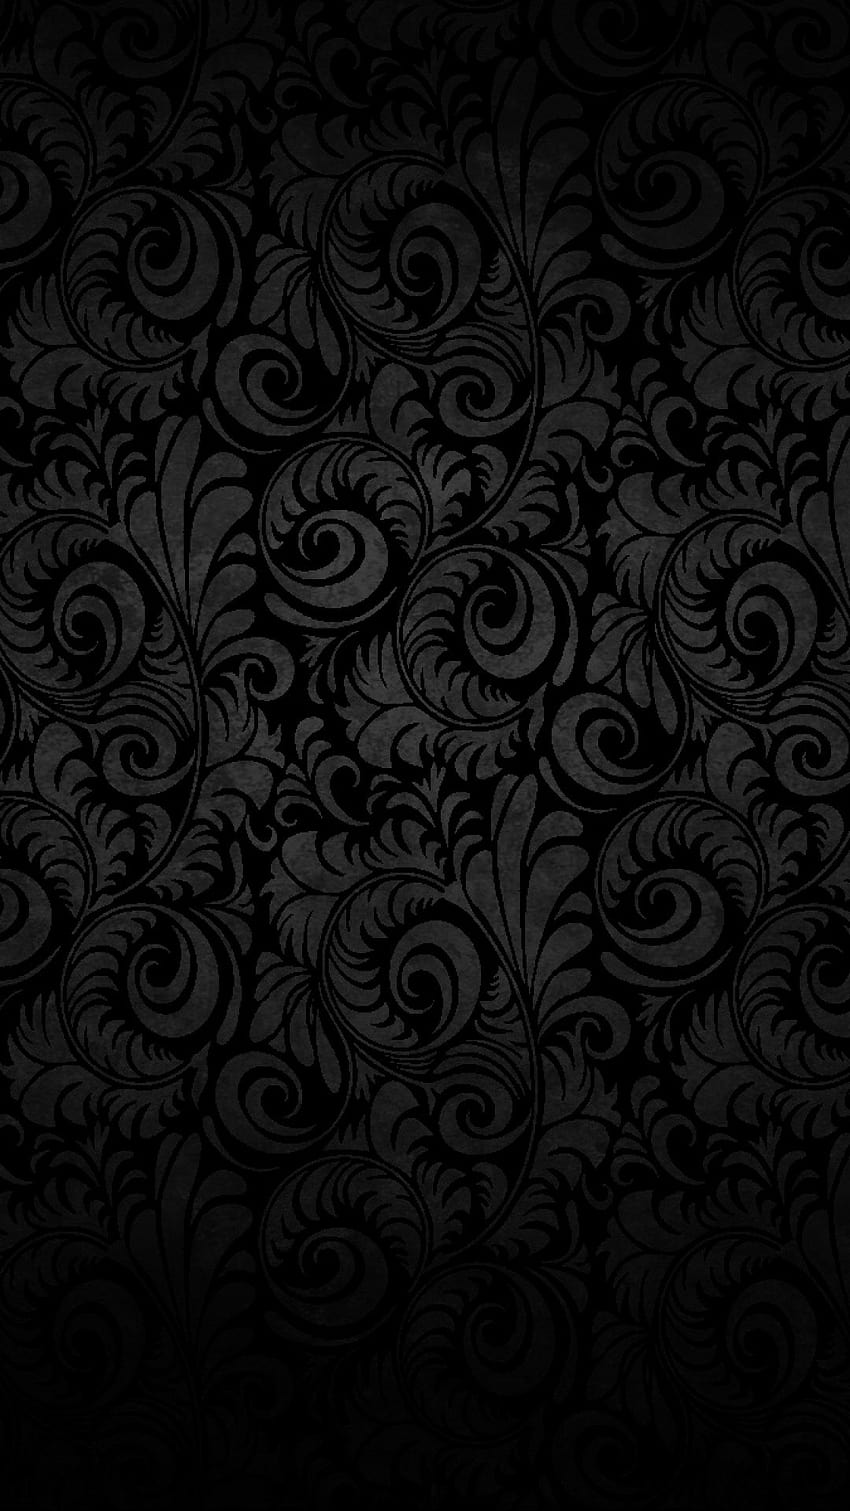 Black Phone Backgrounds Lovely Black Backgrounds Tumblr ·① for and Mobile Devices In Any Inspiration, black phone geometric HD phone wallpaper